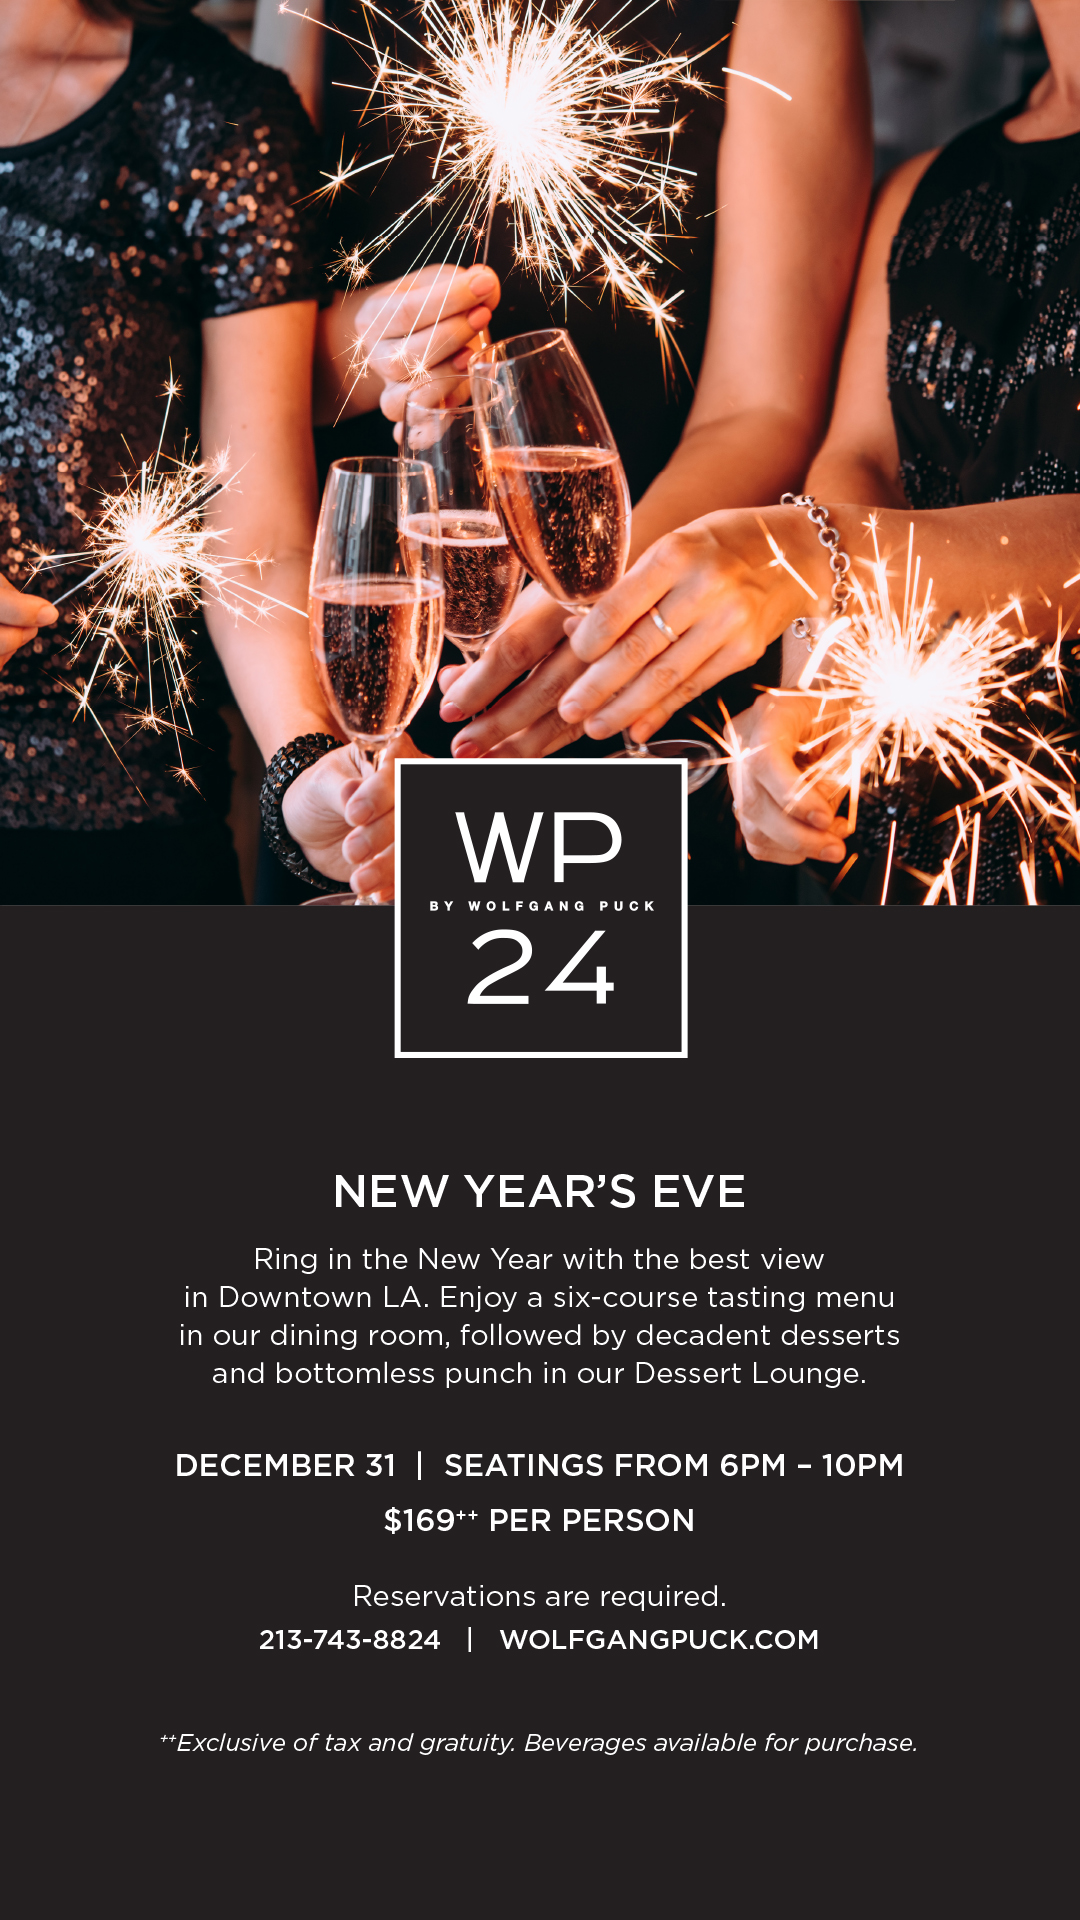 New Year's Eve - LA LIVE w/ Wolfgang Puck